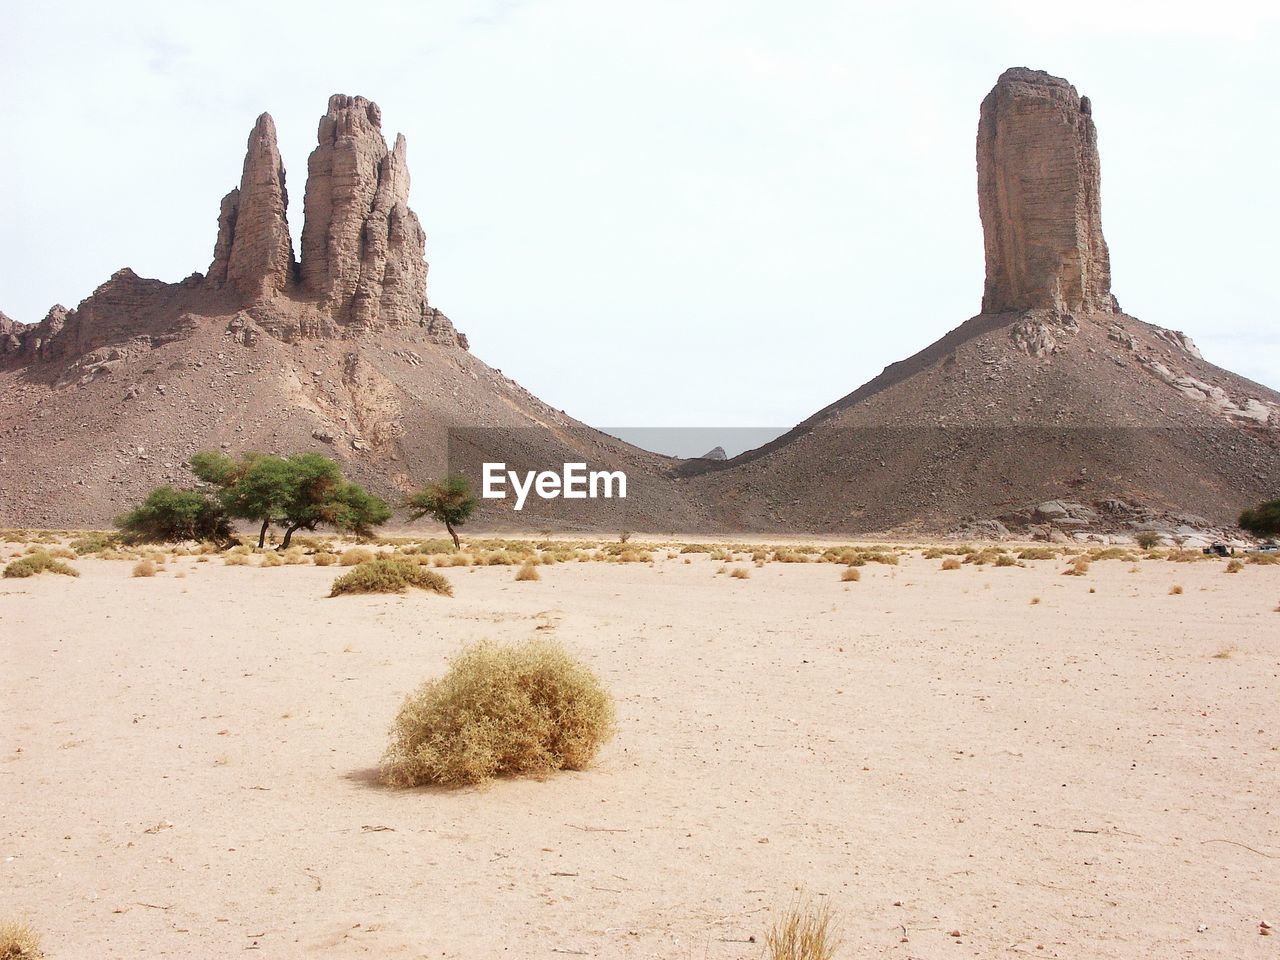 SCENIC VIEW OF ROCK FORMATIONS IN DESERT